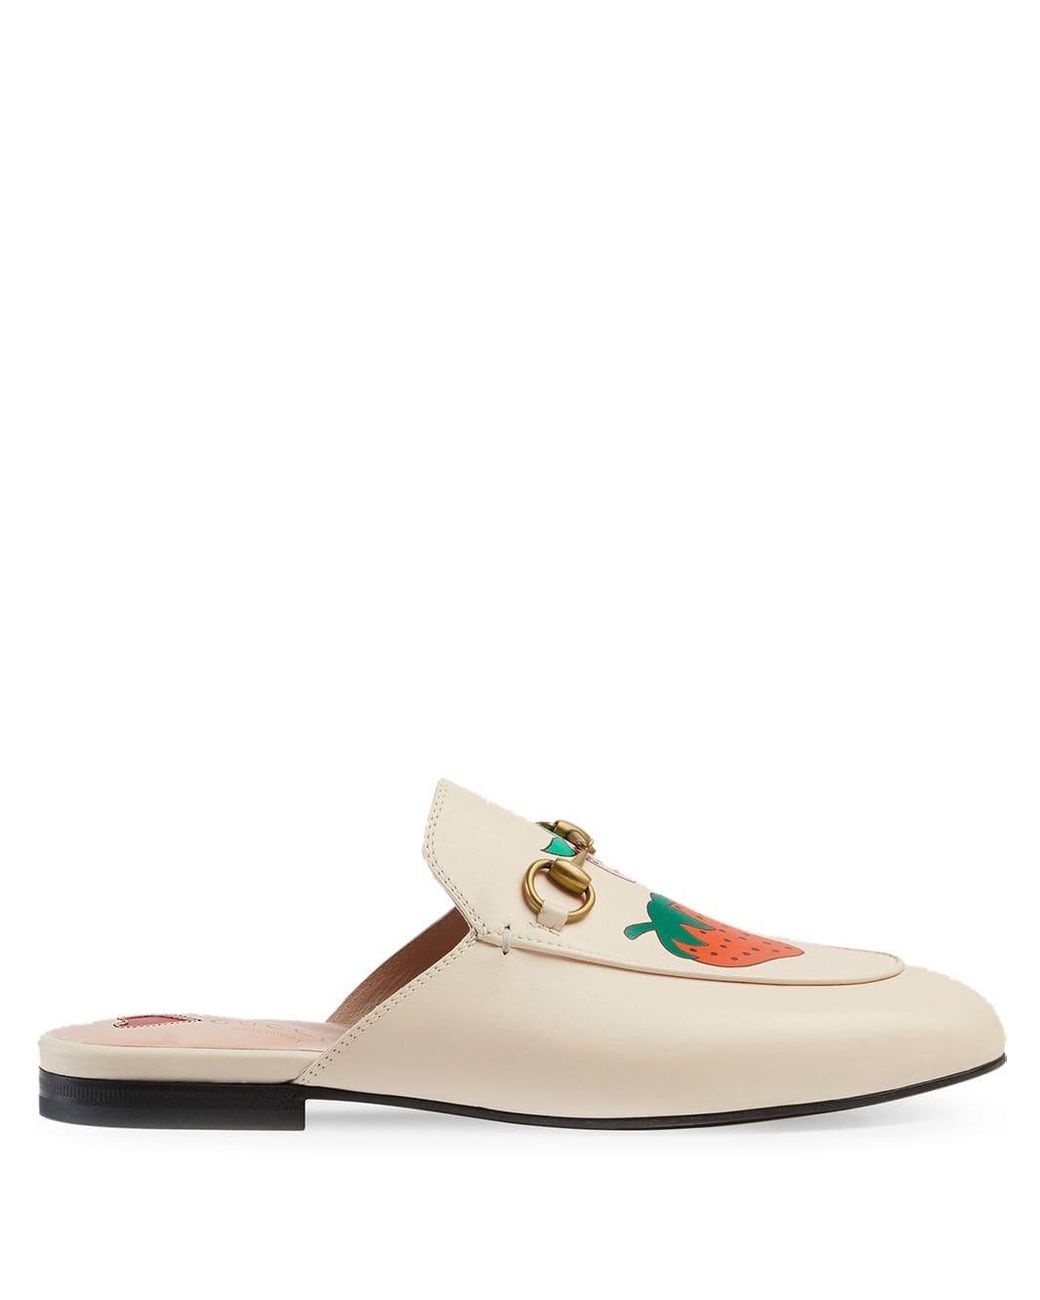 Gucci Princetown Strawberry Mules | Lyst